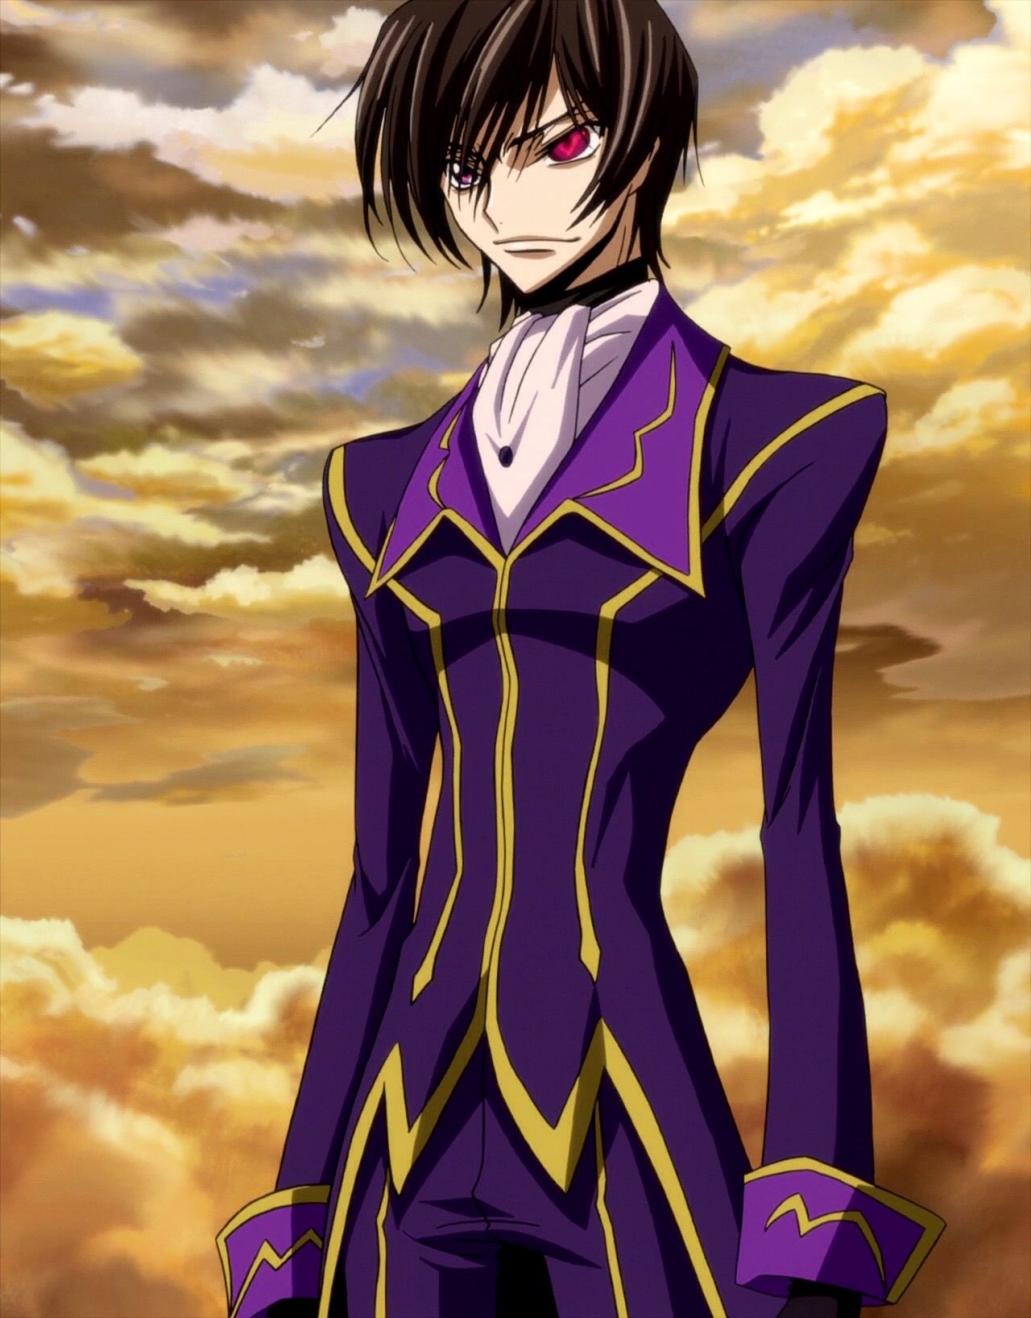 What Is the Legacy of Lelouch Lamperouge?